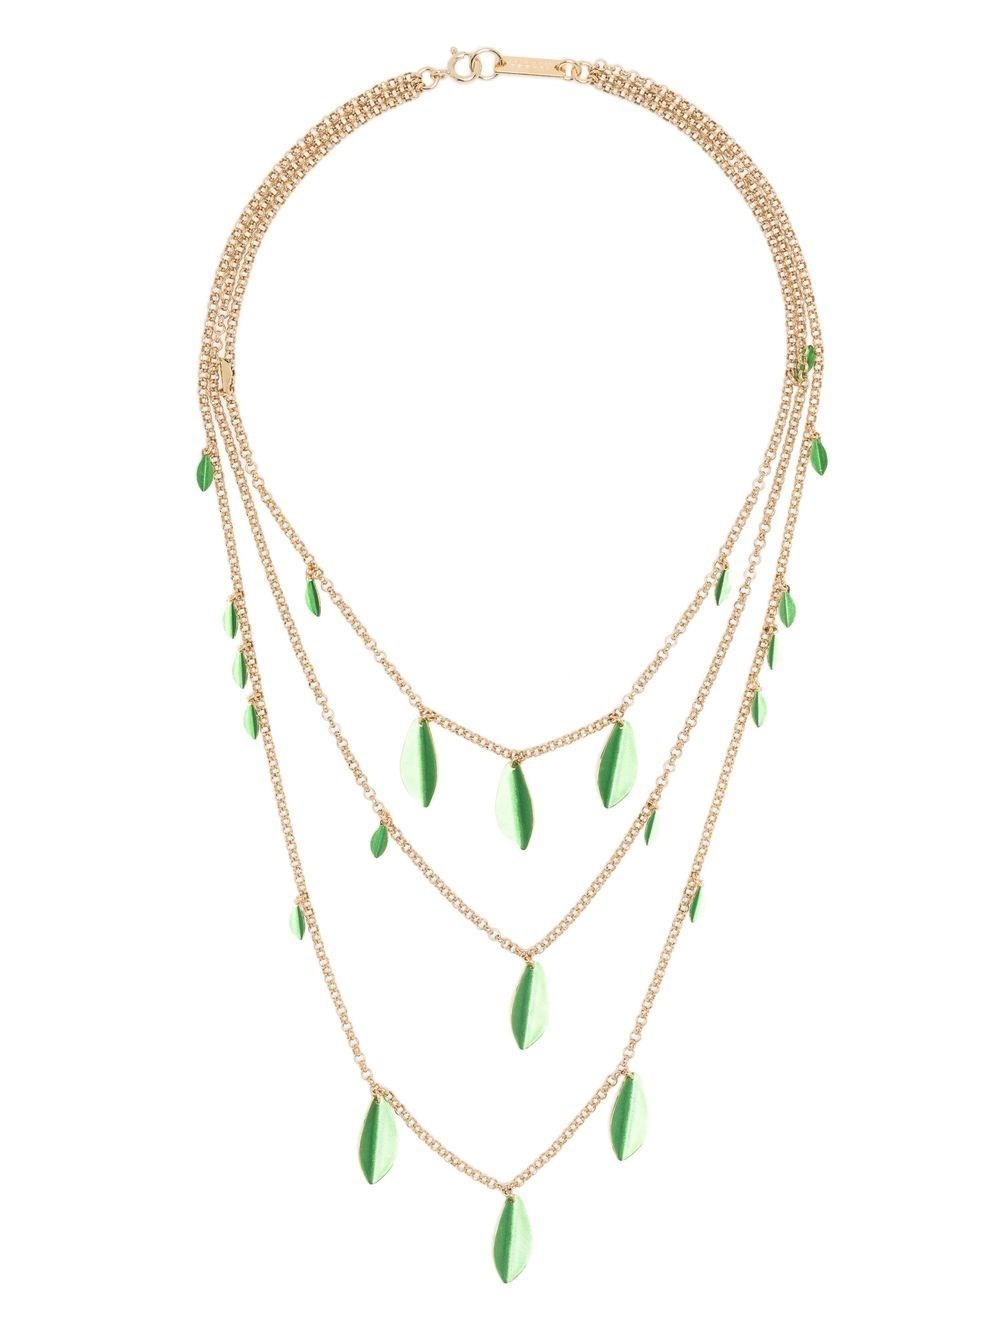 ISABEL MARANT MULTI CHAIN NECKLACE